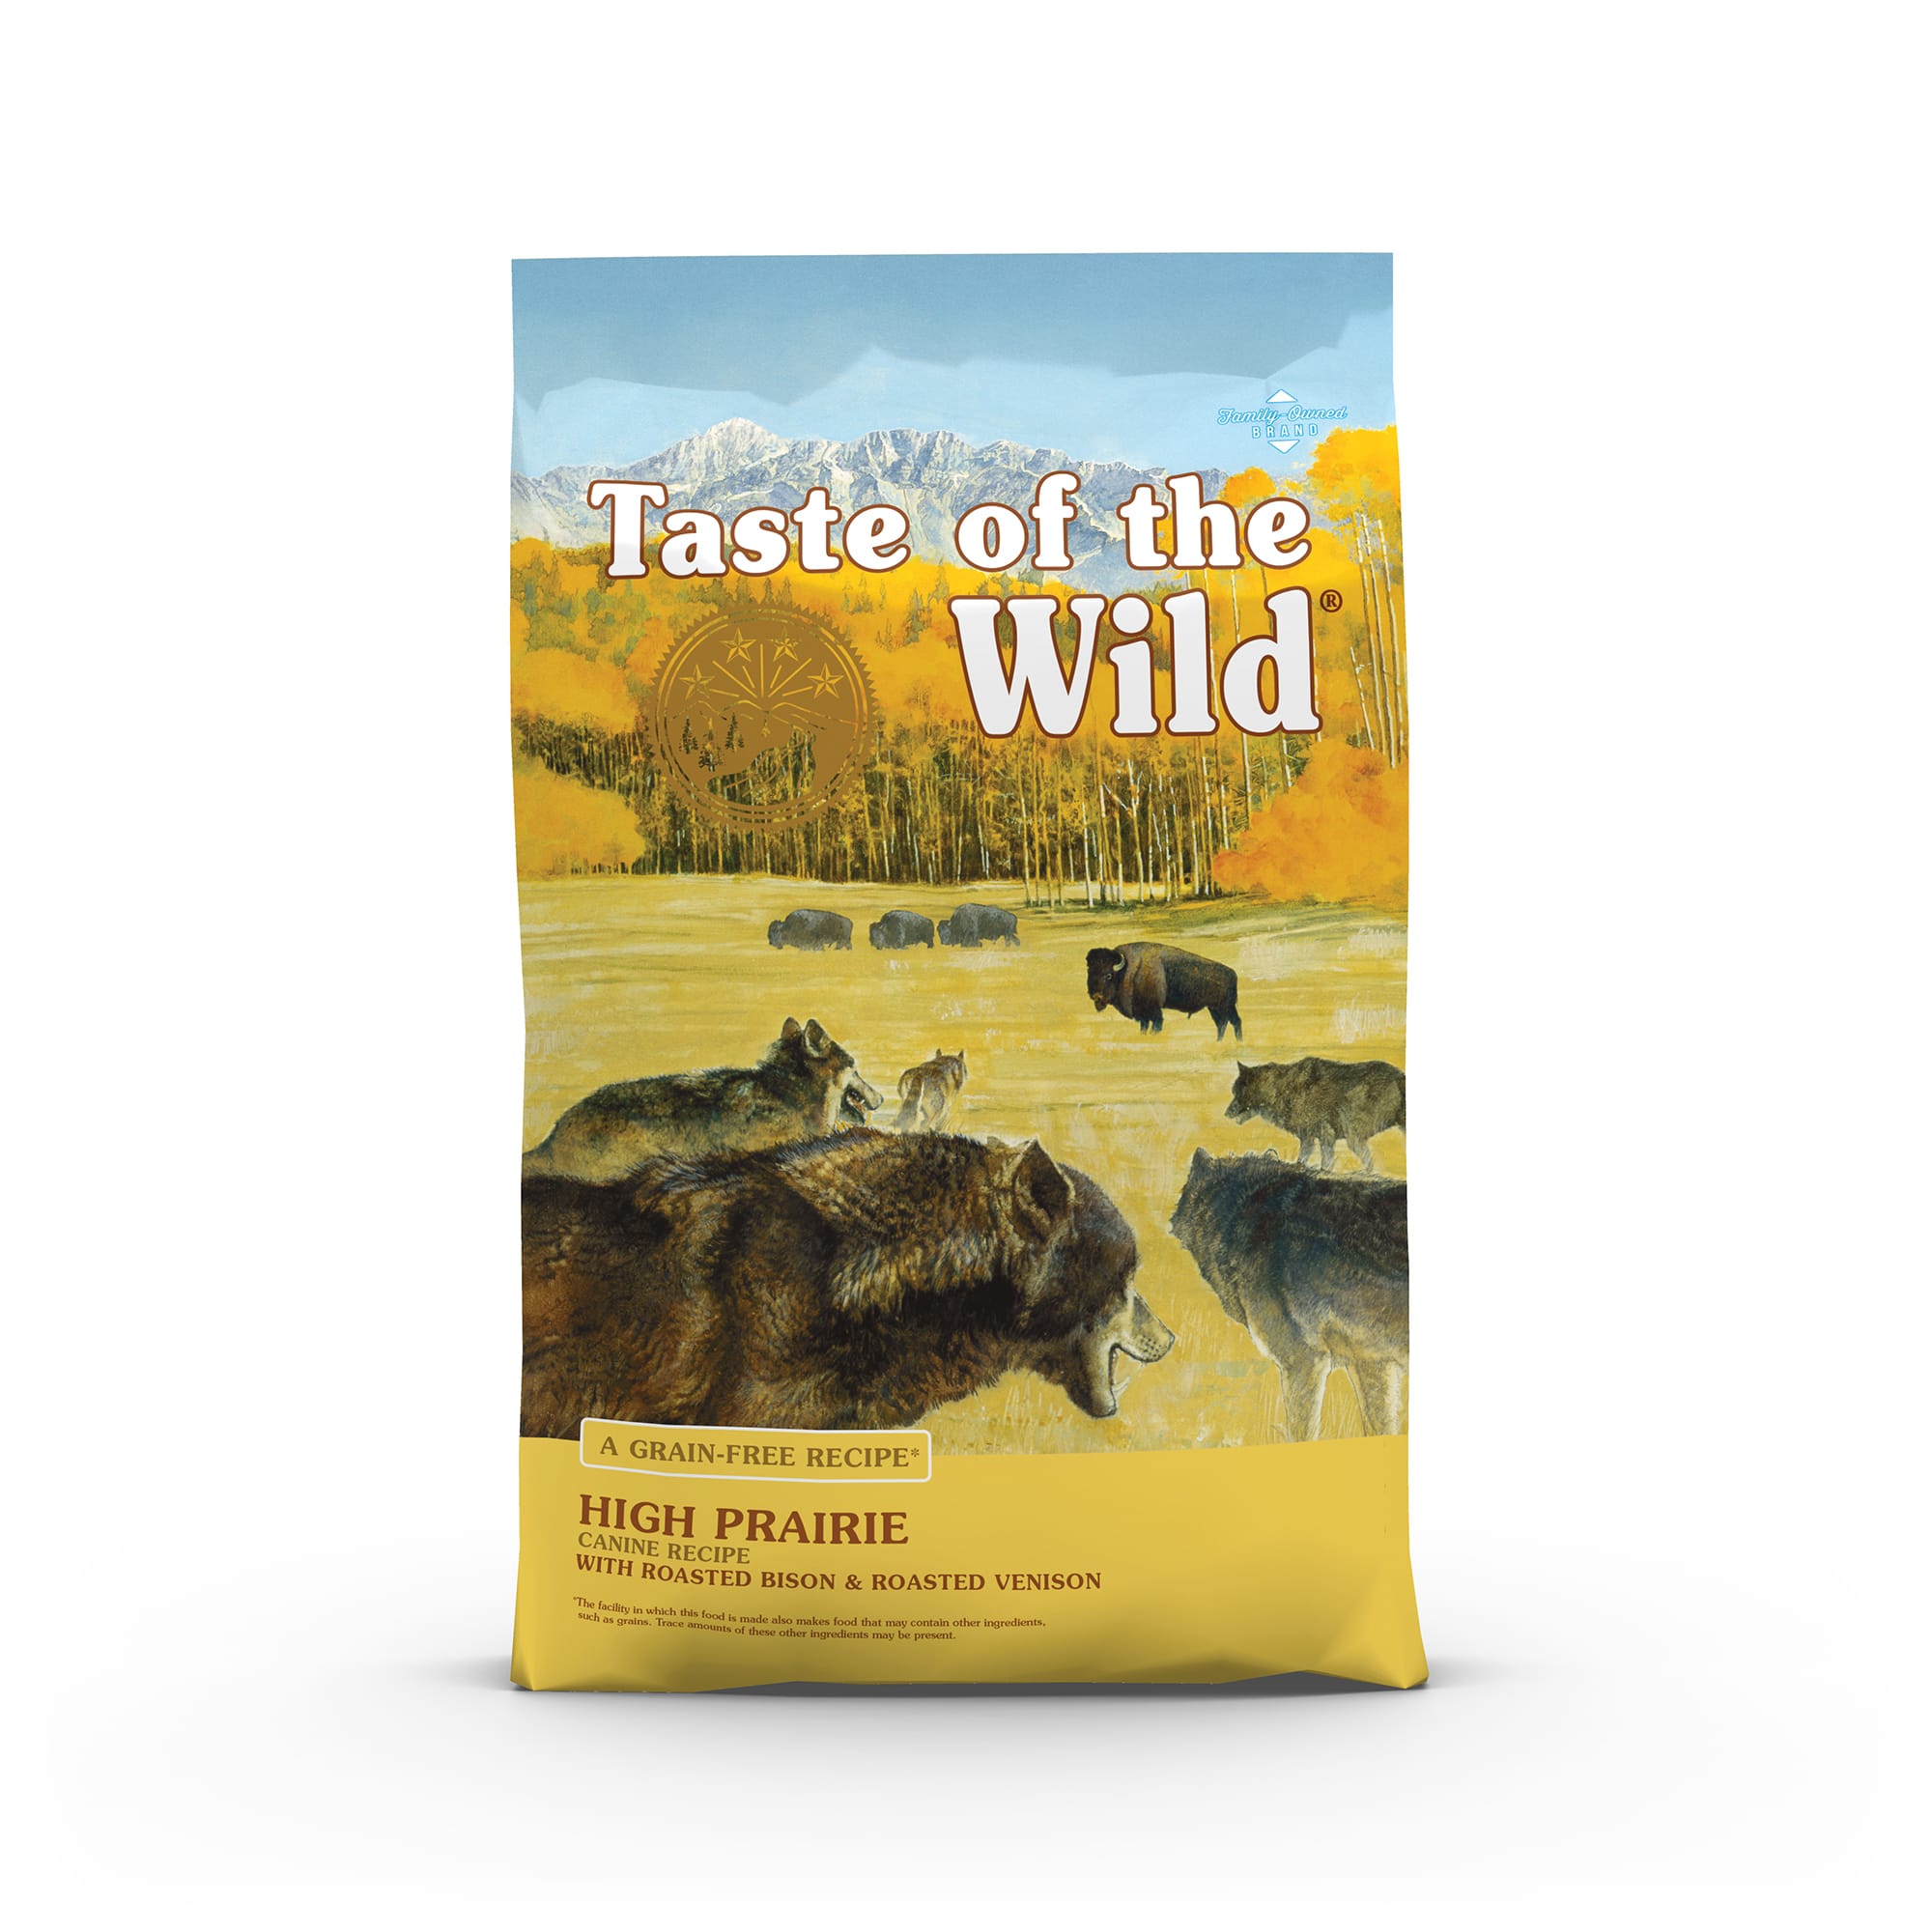 Taste of the Wild High Prairie Grain Free Dry Dog Food with Roasted Bison & Venison, 14 LB Bag, 14 LBS